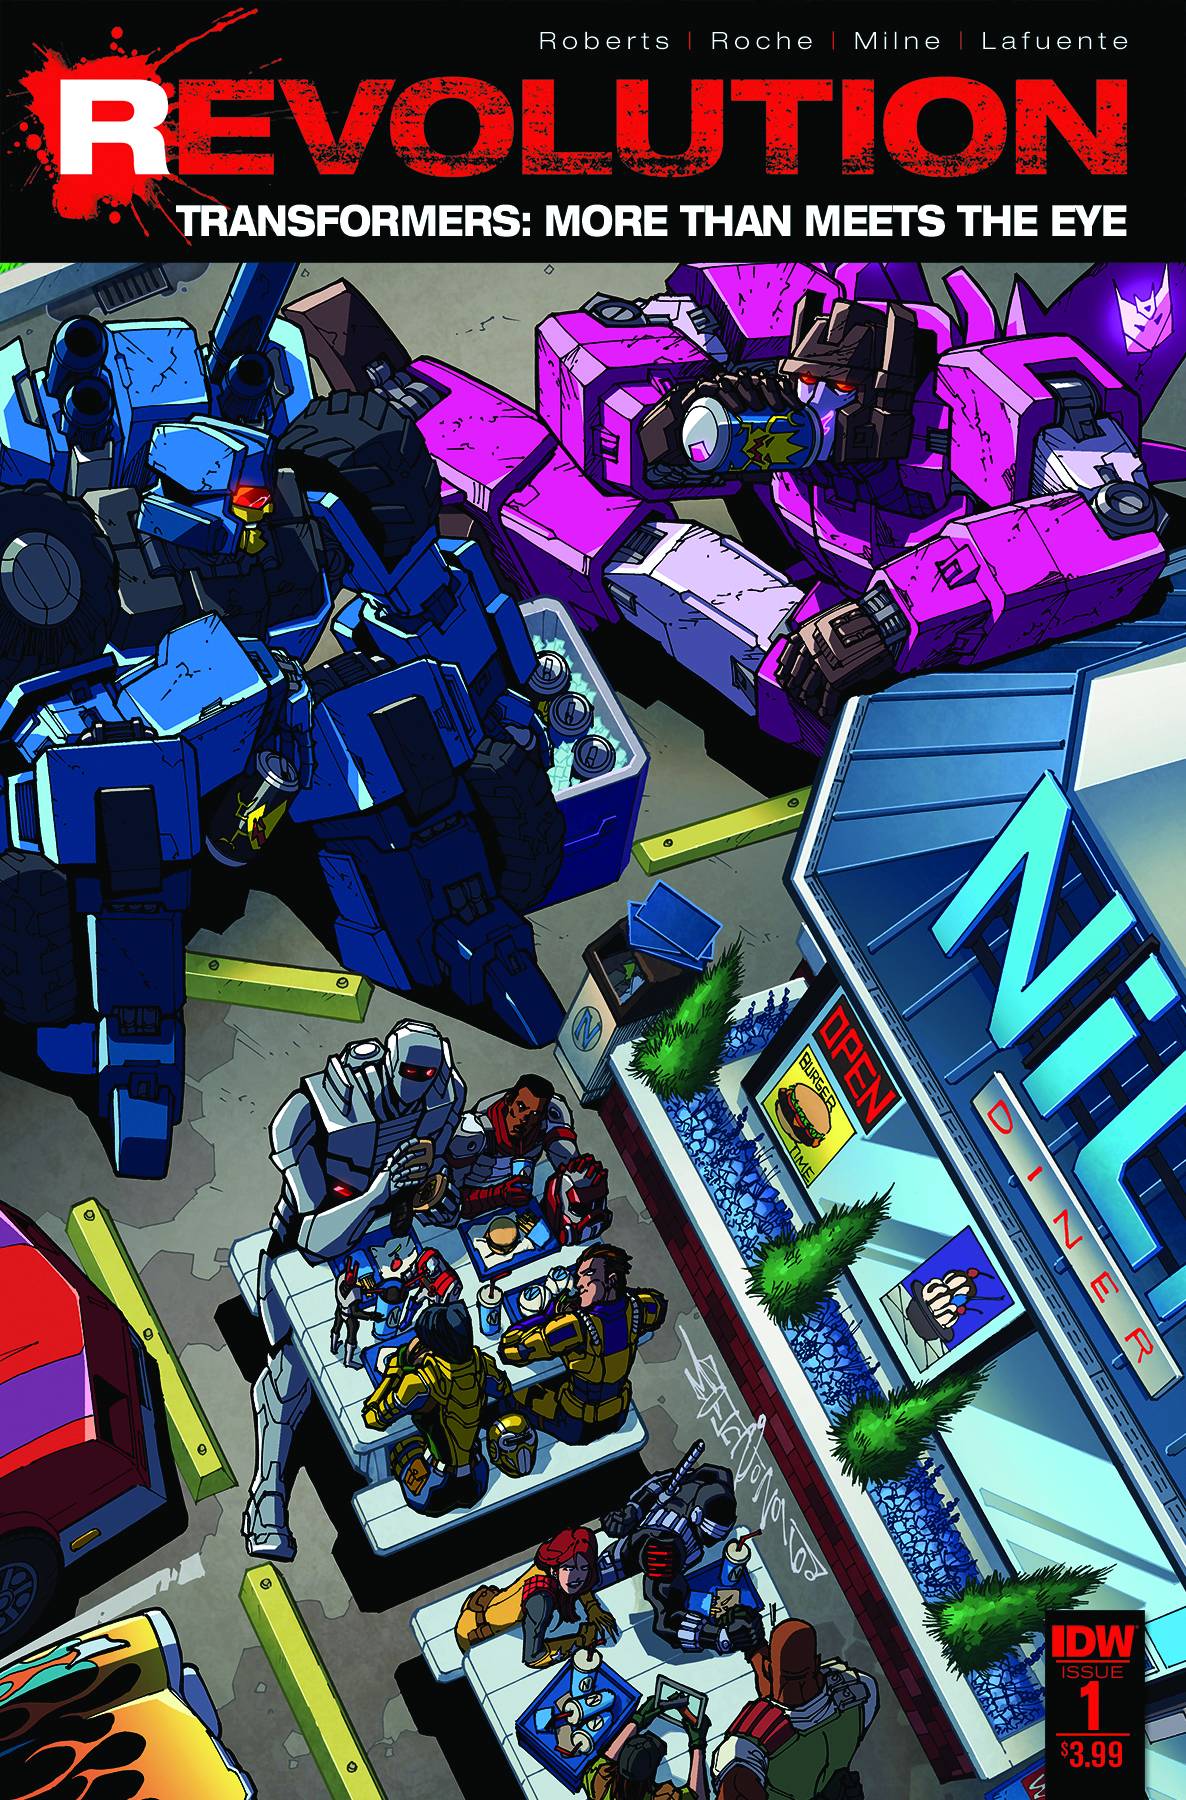 Transformers More Than Meets The Eye Revolution #1